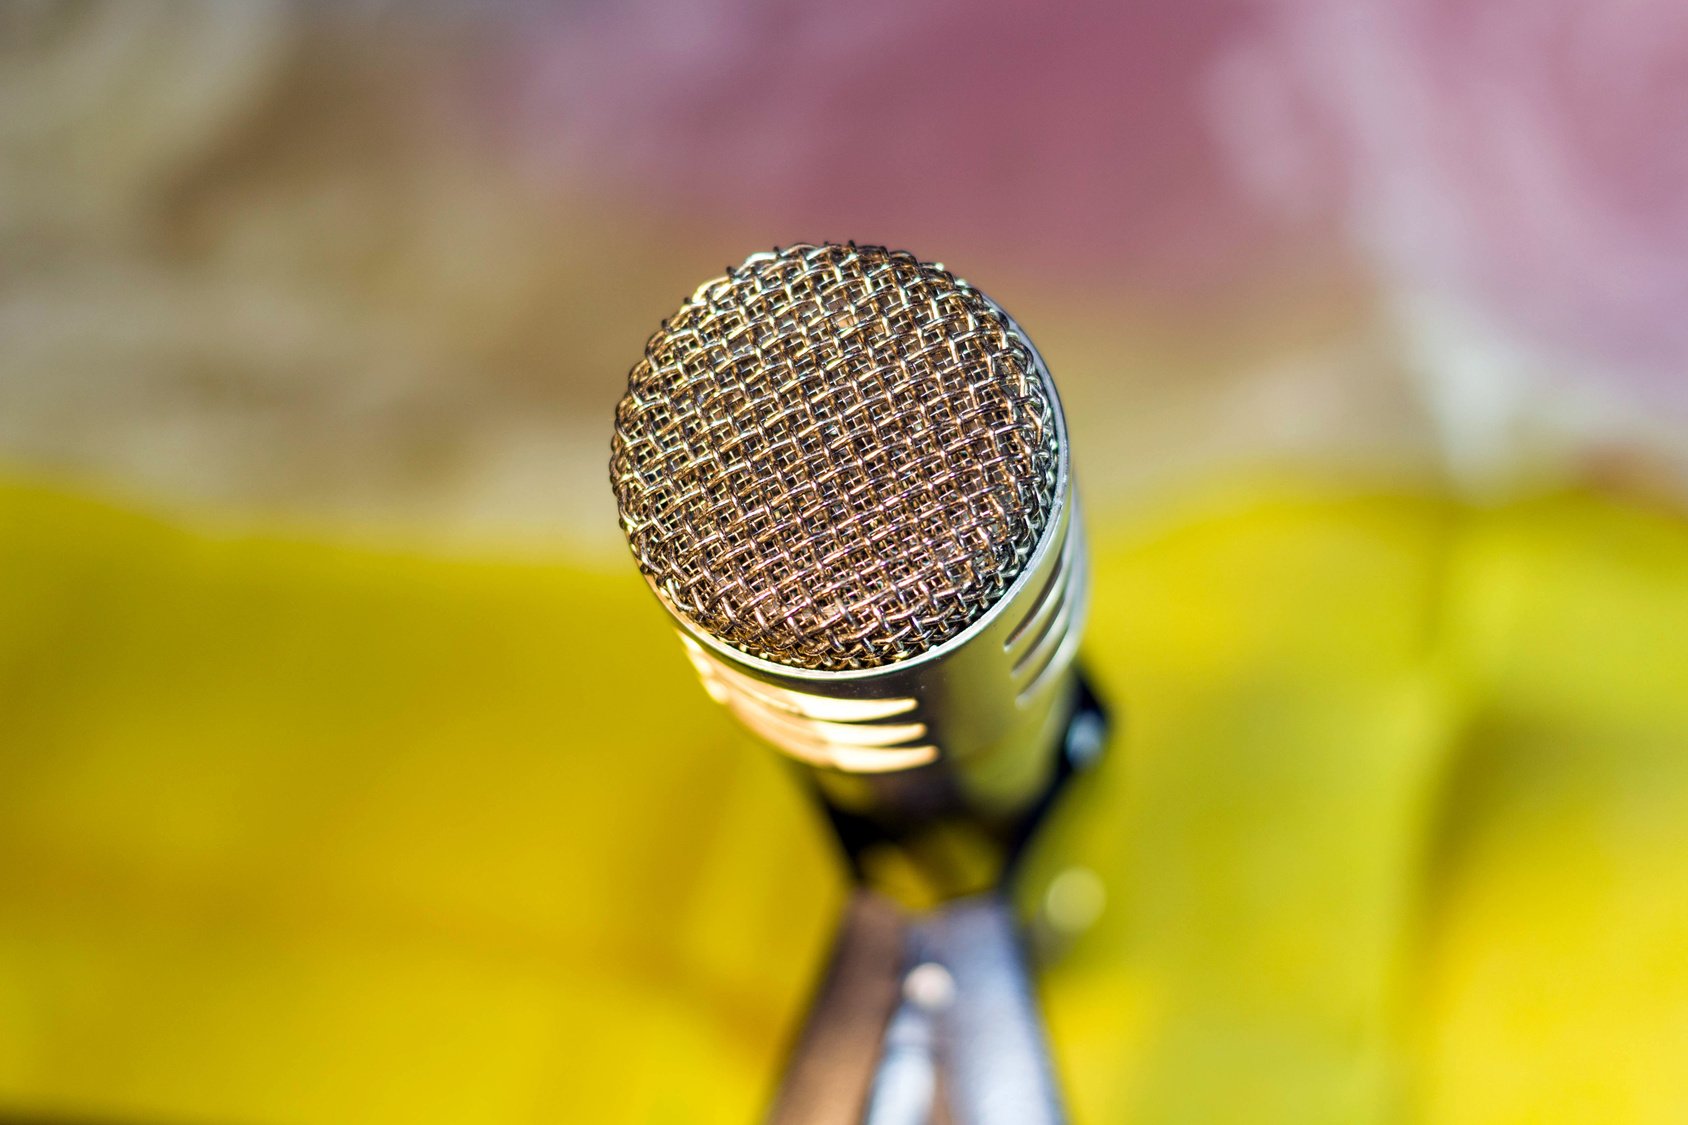 Silver microphone on blurred yellow background